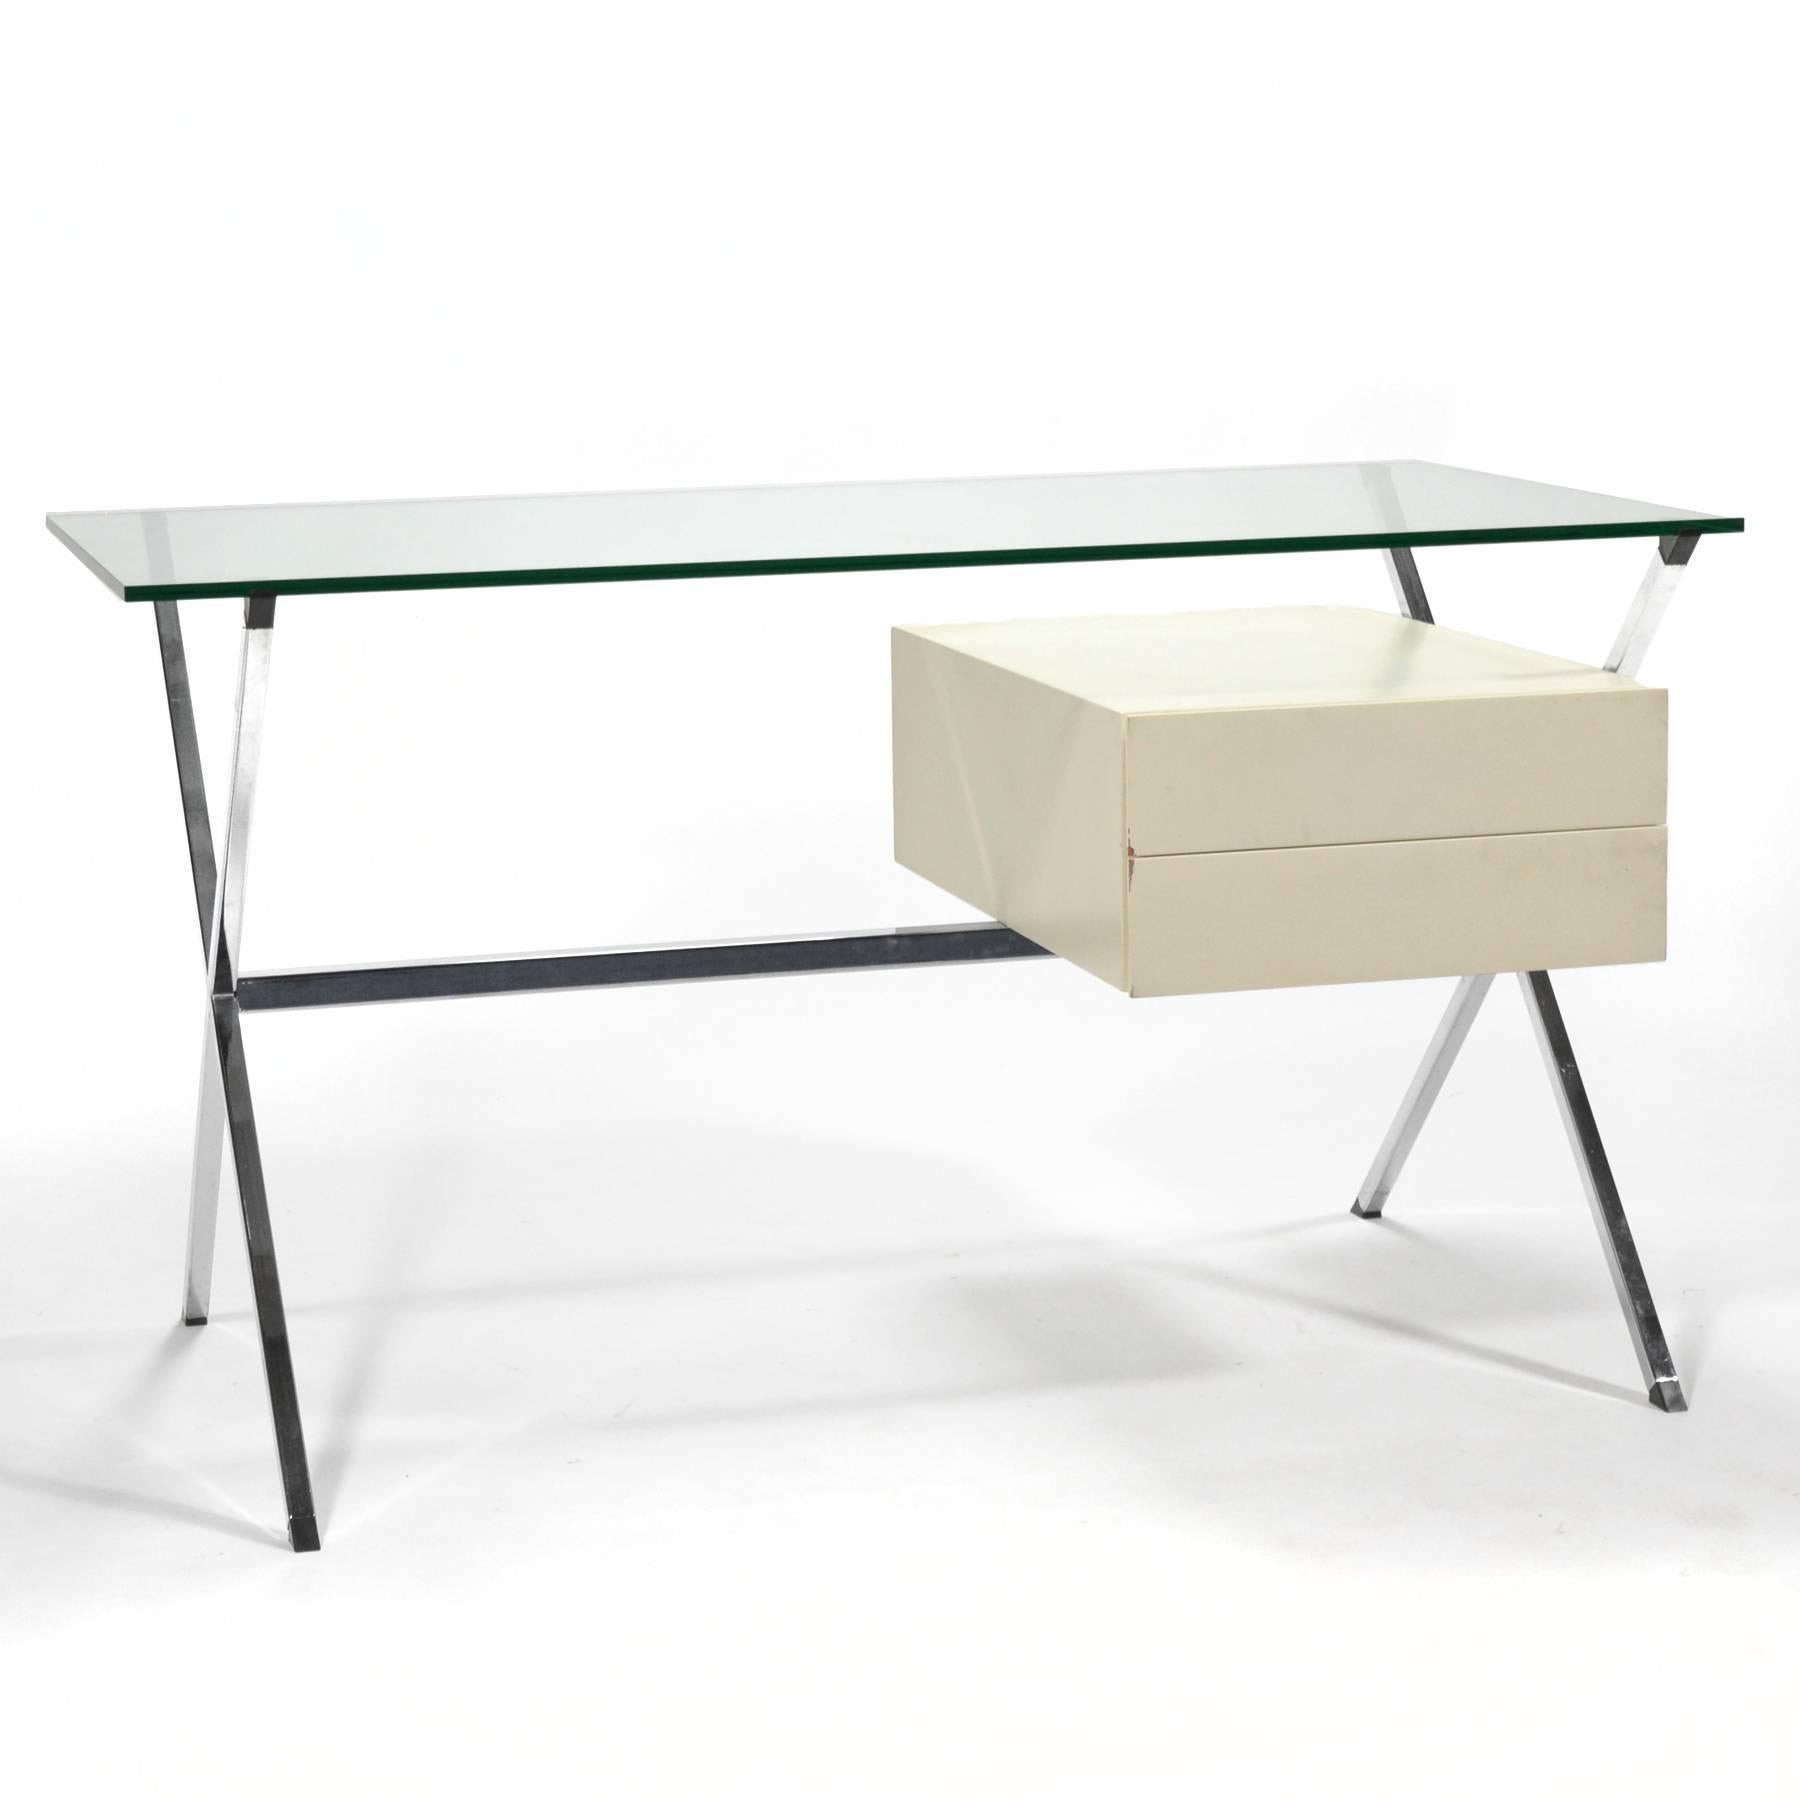 This beautiful minimalist desk was designed by Franco Albini in 1928. This example is a later edition by Knoll. It features a chromed X-form base supporting a glass top and an ivory lacquered oak two-drawer case.